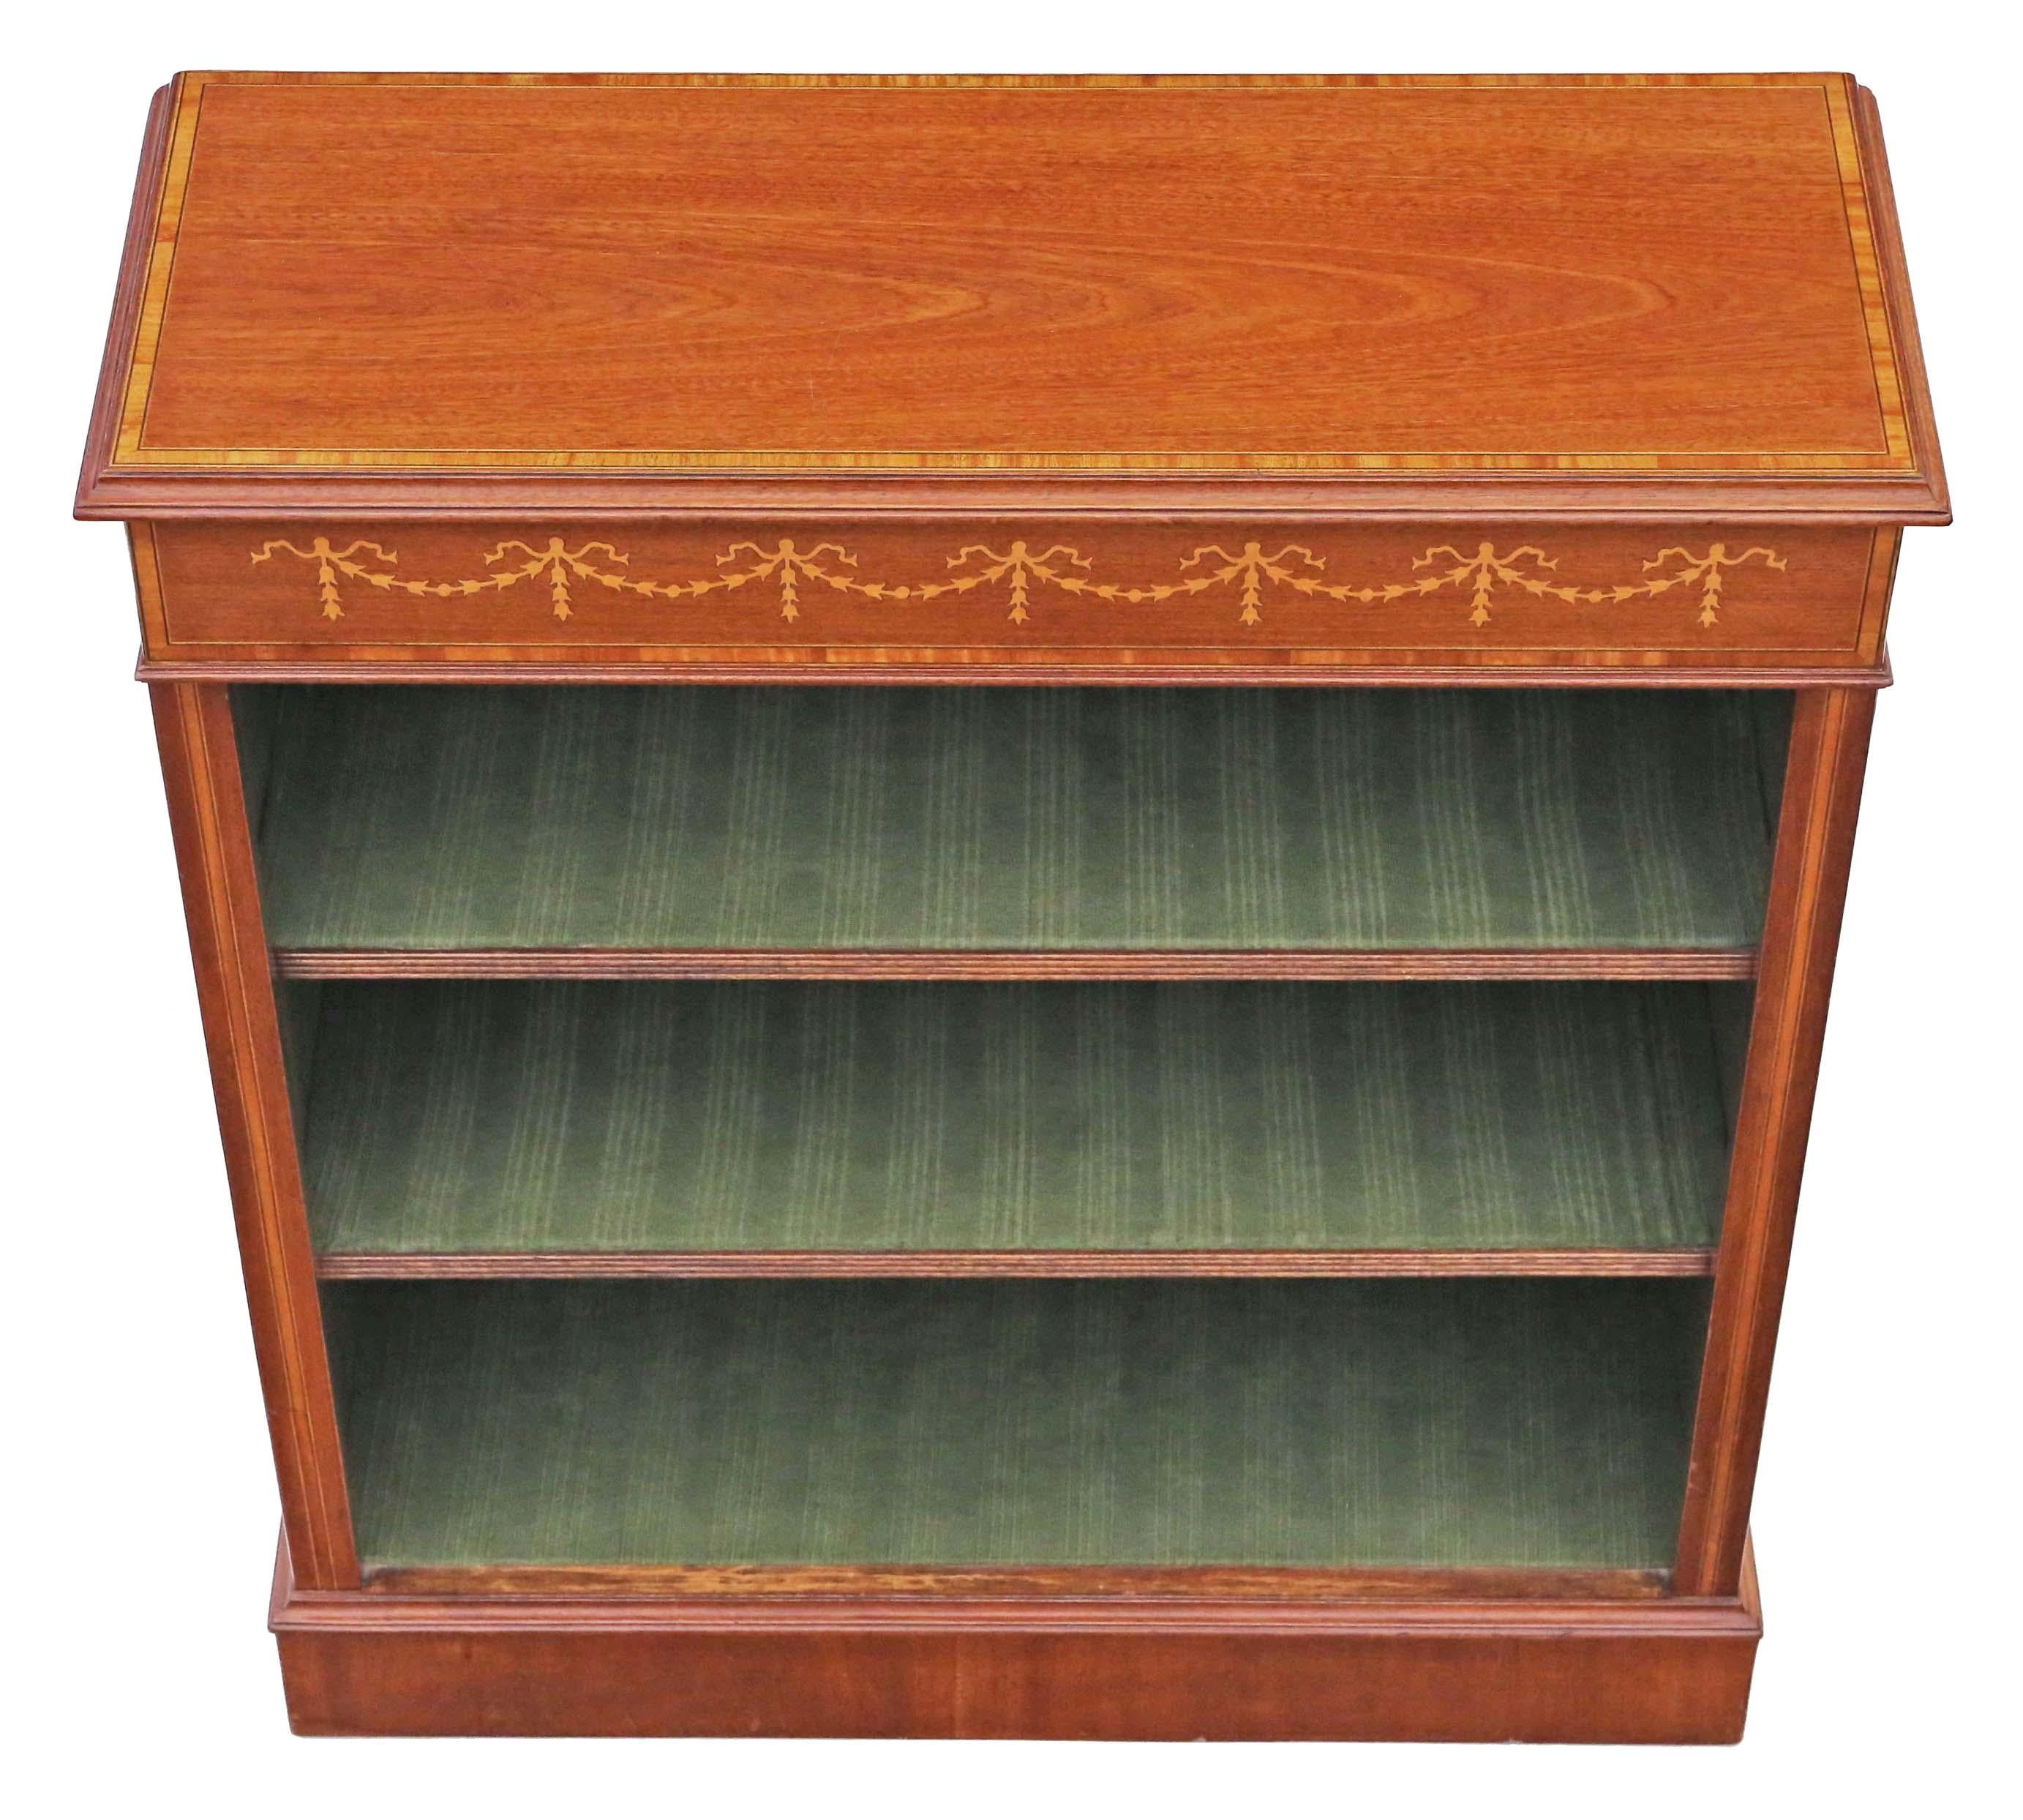 Fine quality Victorian 19th century inlaid mahogany adjustable bookcase, C1890.

Solid and strong, with no loose joints and no woodworm. A lovely quality piece.

A fine quality piece of furniture that is far better than most. Attractive